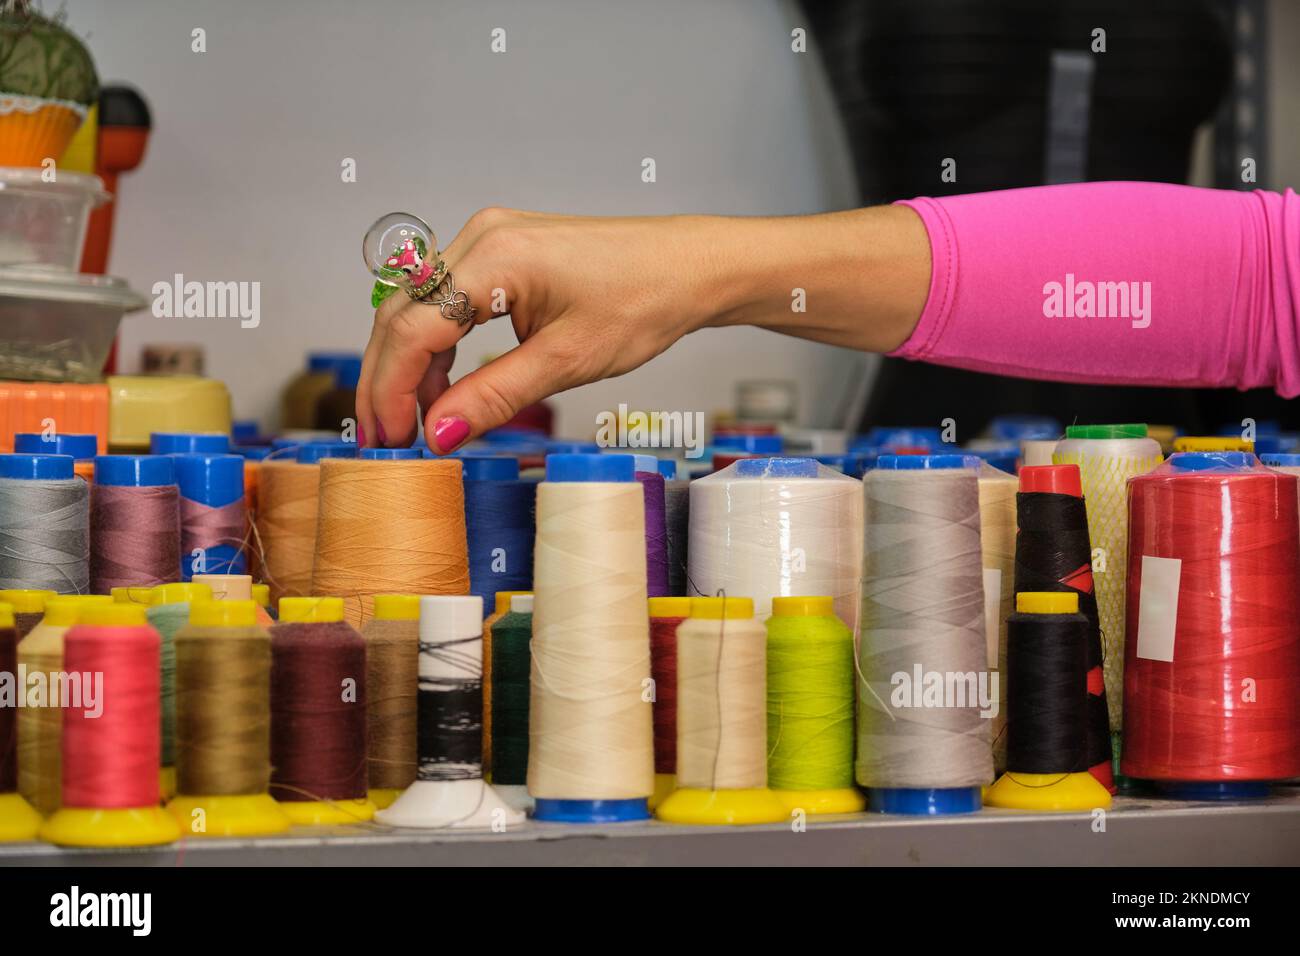 Unrecognizable dressmaker with colorfull clothes choosing a thread. Stock Photo